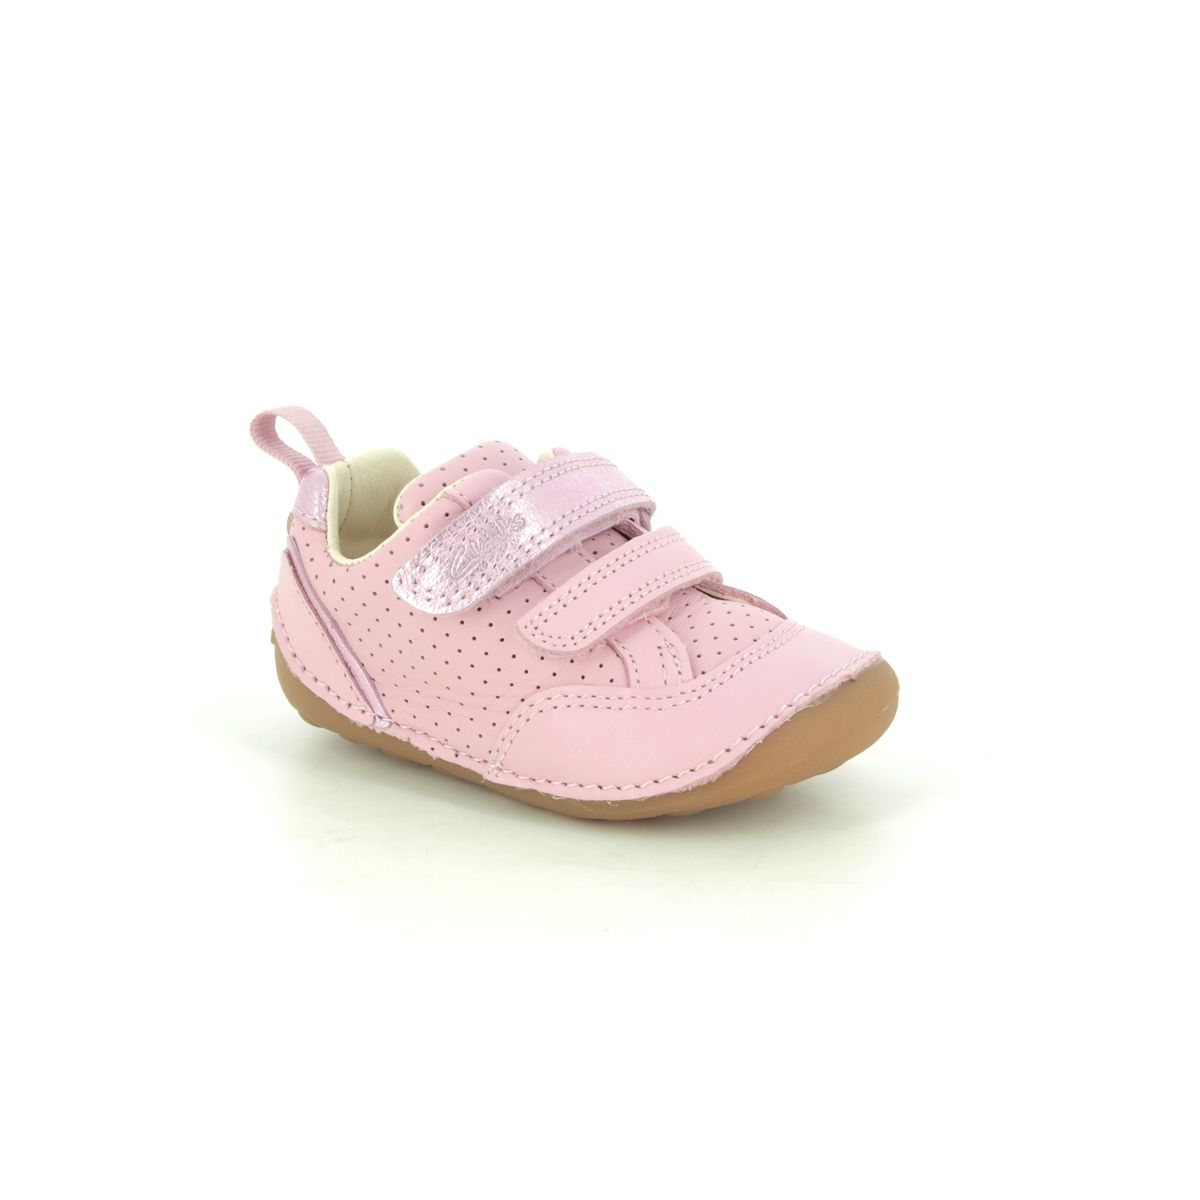 Clarks Tiny Sky T Pink Leather Kids Girls First And Baby Shoes 576287G In Size 2.5 In Plain Pink Leather G Width Fitting For kids